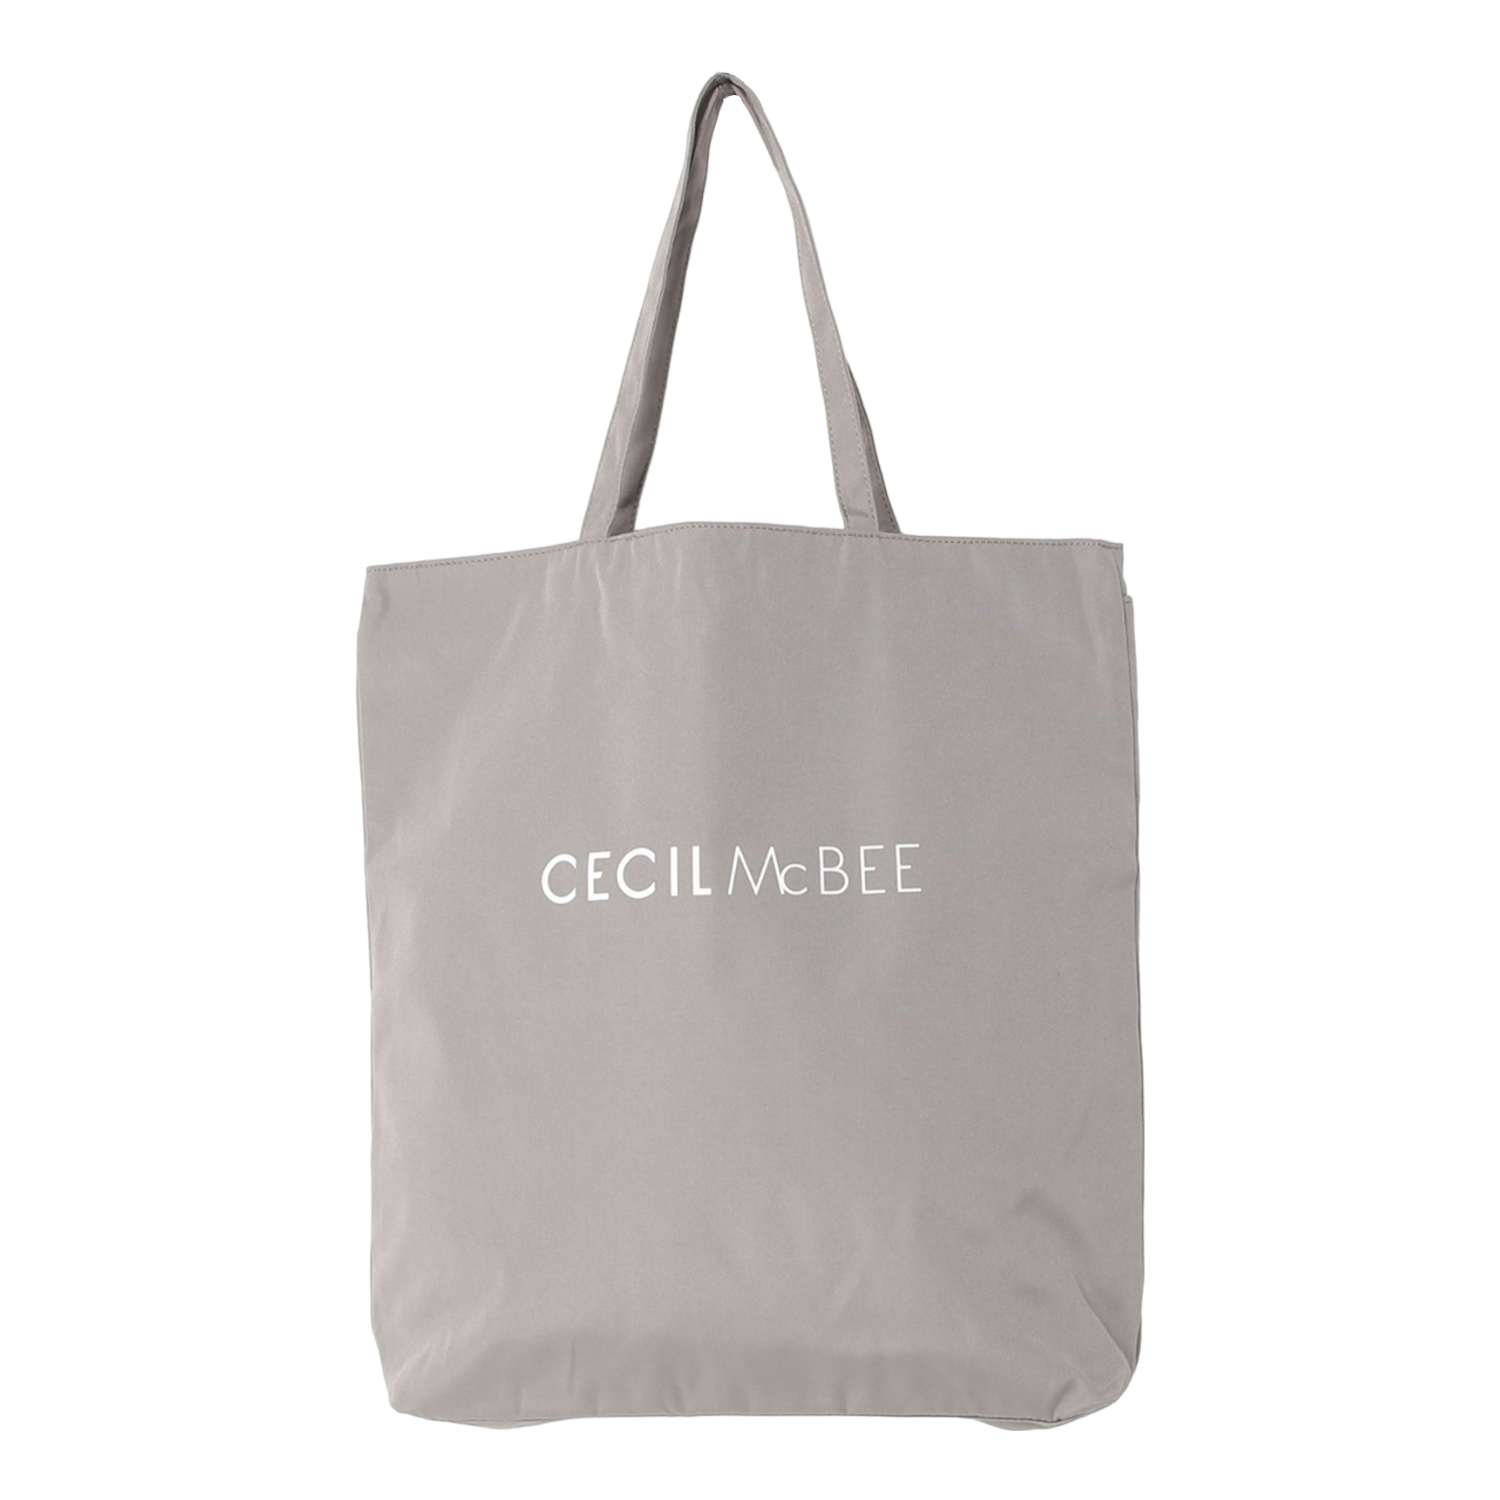 CECIL McBEE セシルマクビー トートバッグ レディース カラービッグト TOTE BAG ...